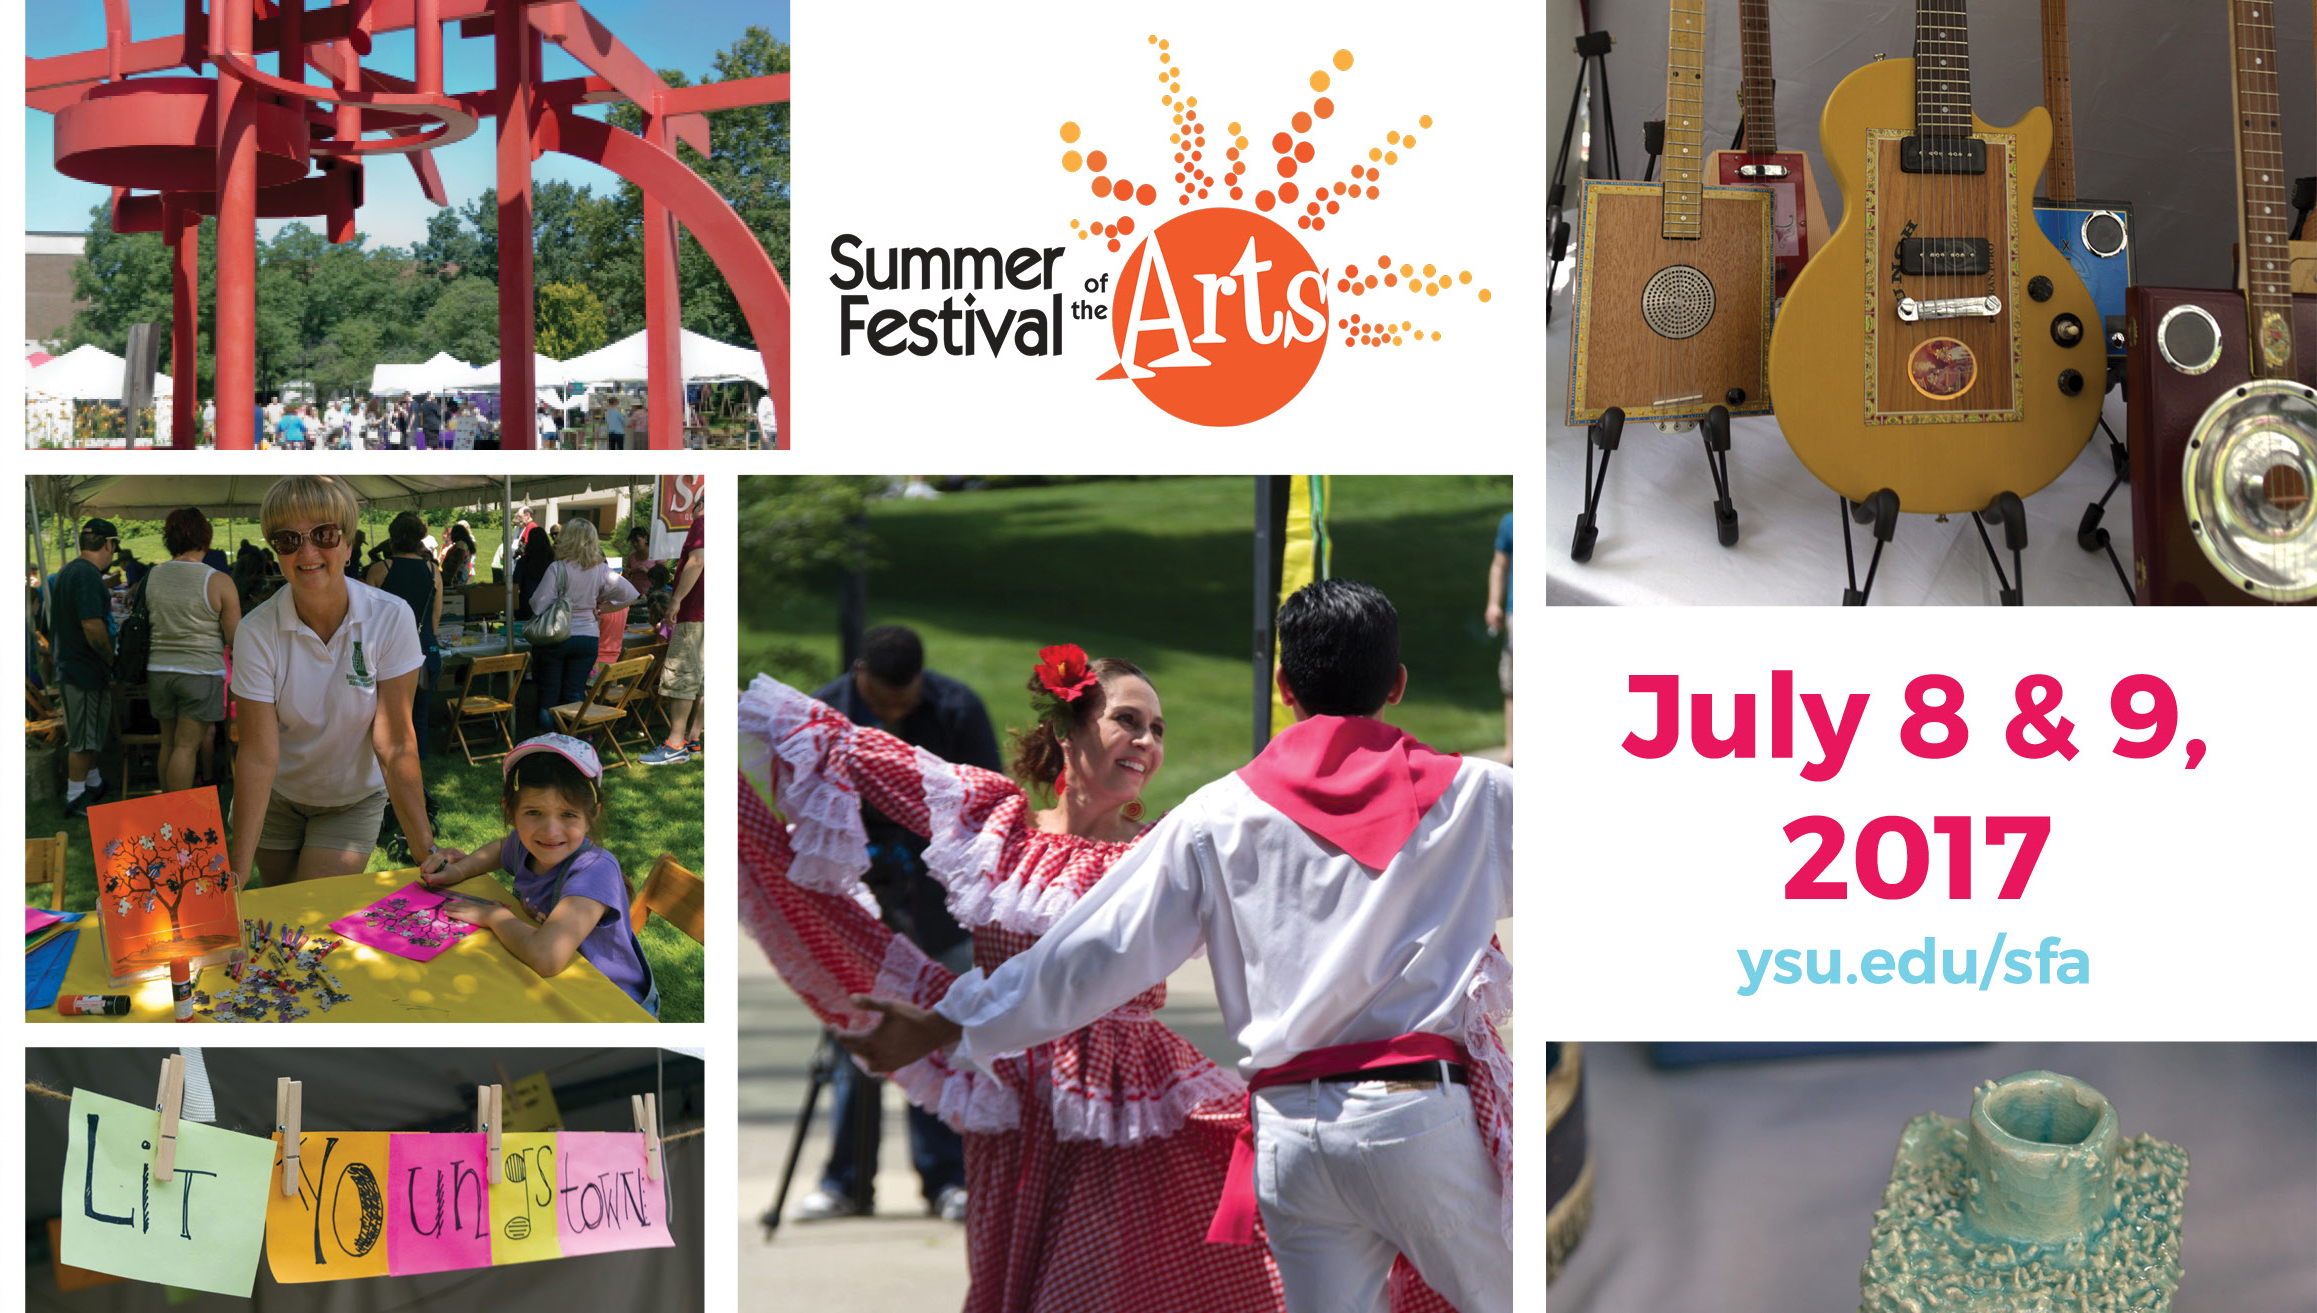 Summer Festival of the Arts this weekend on campus YSU